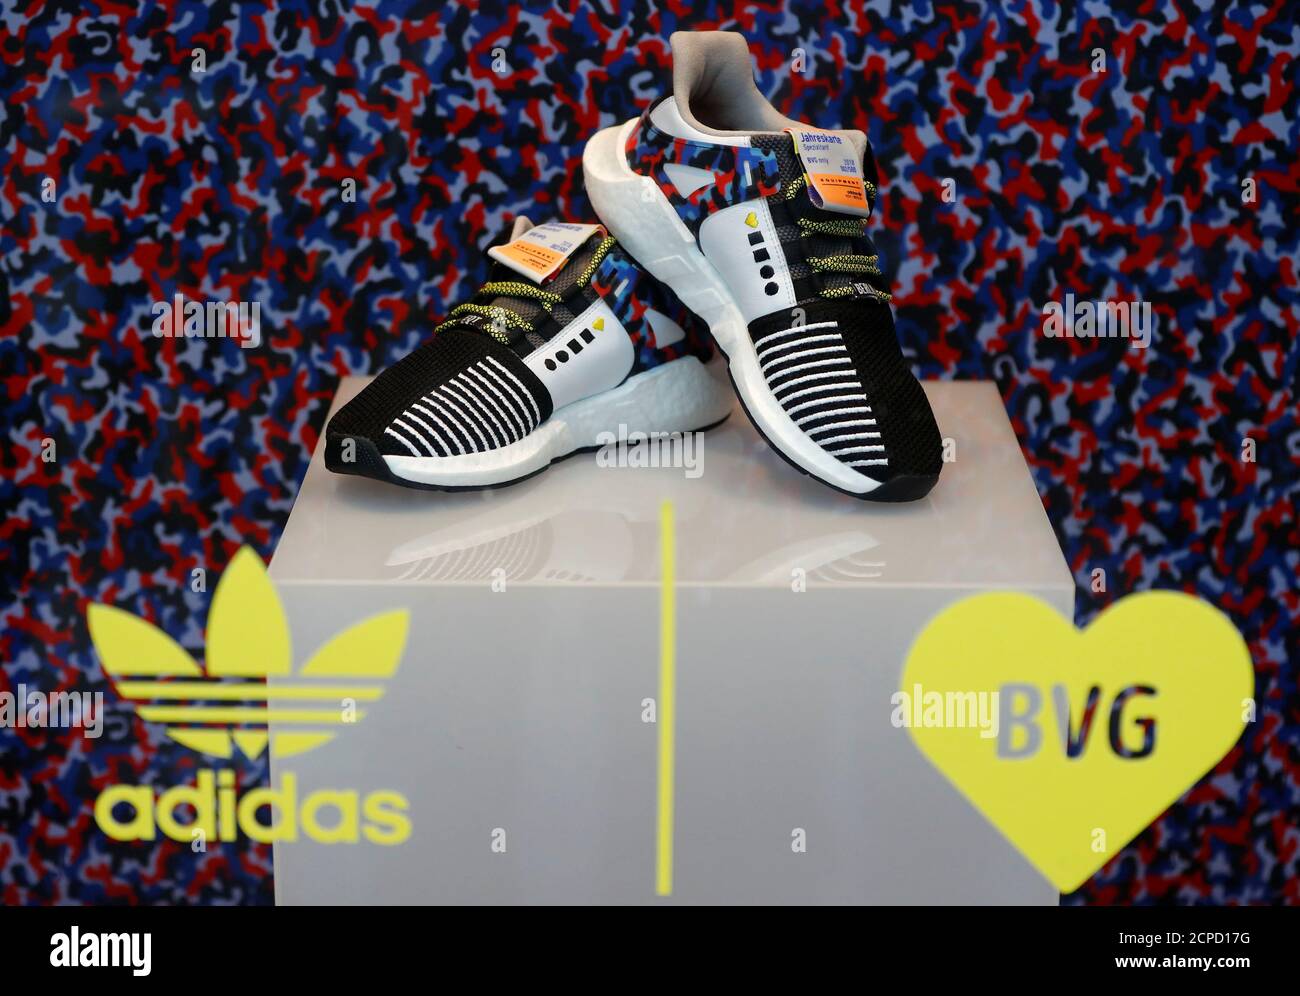 adidas limited edition store